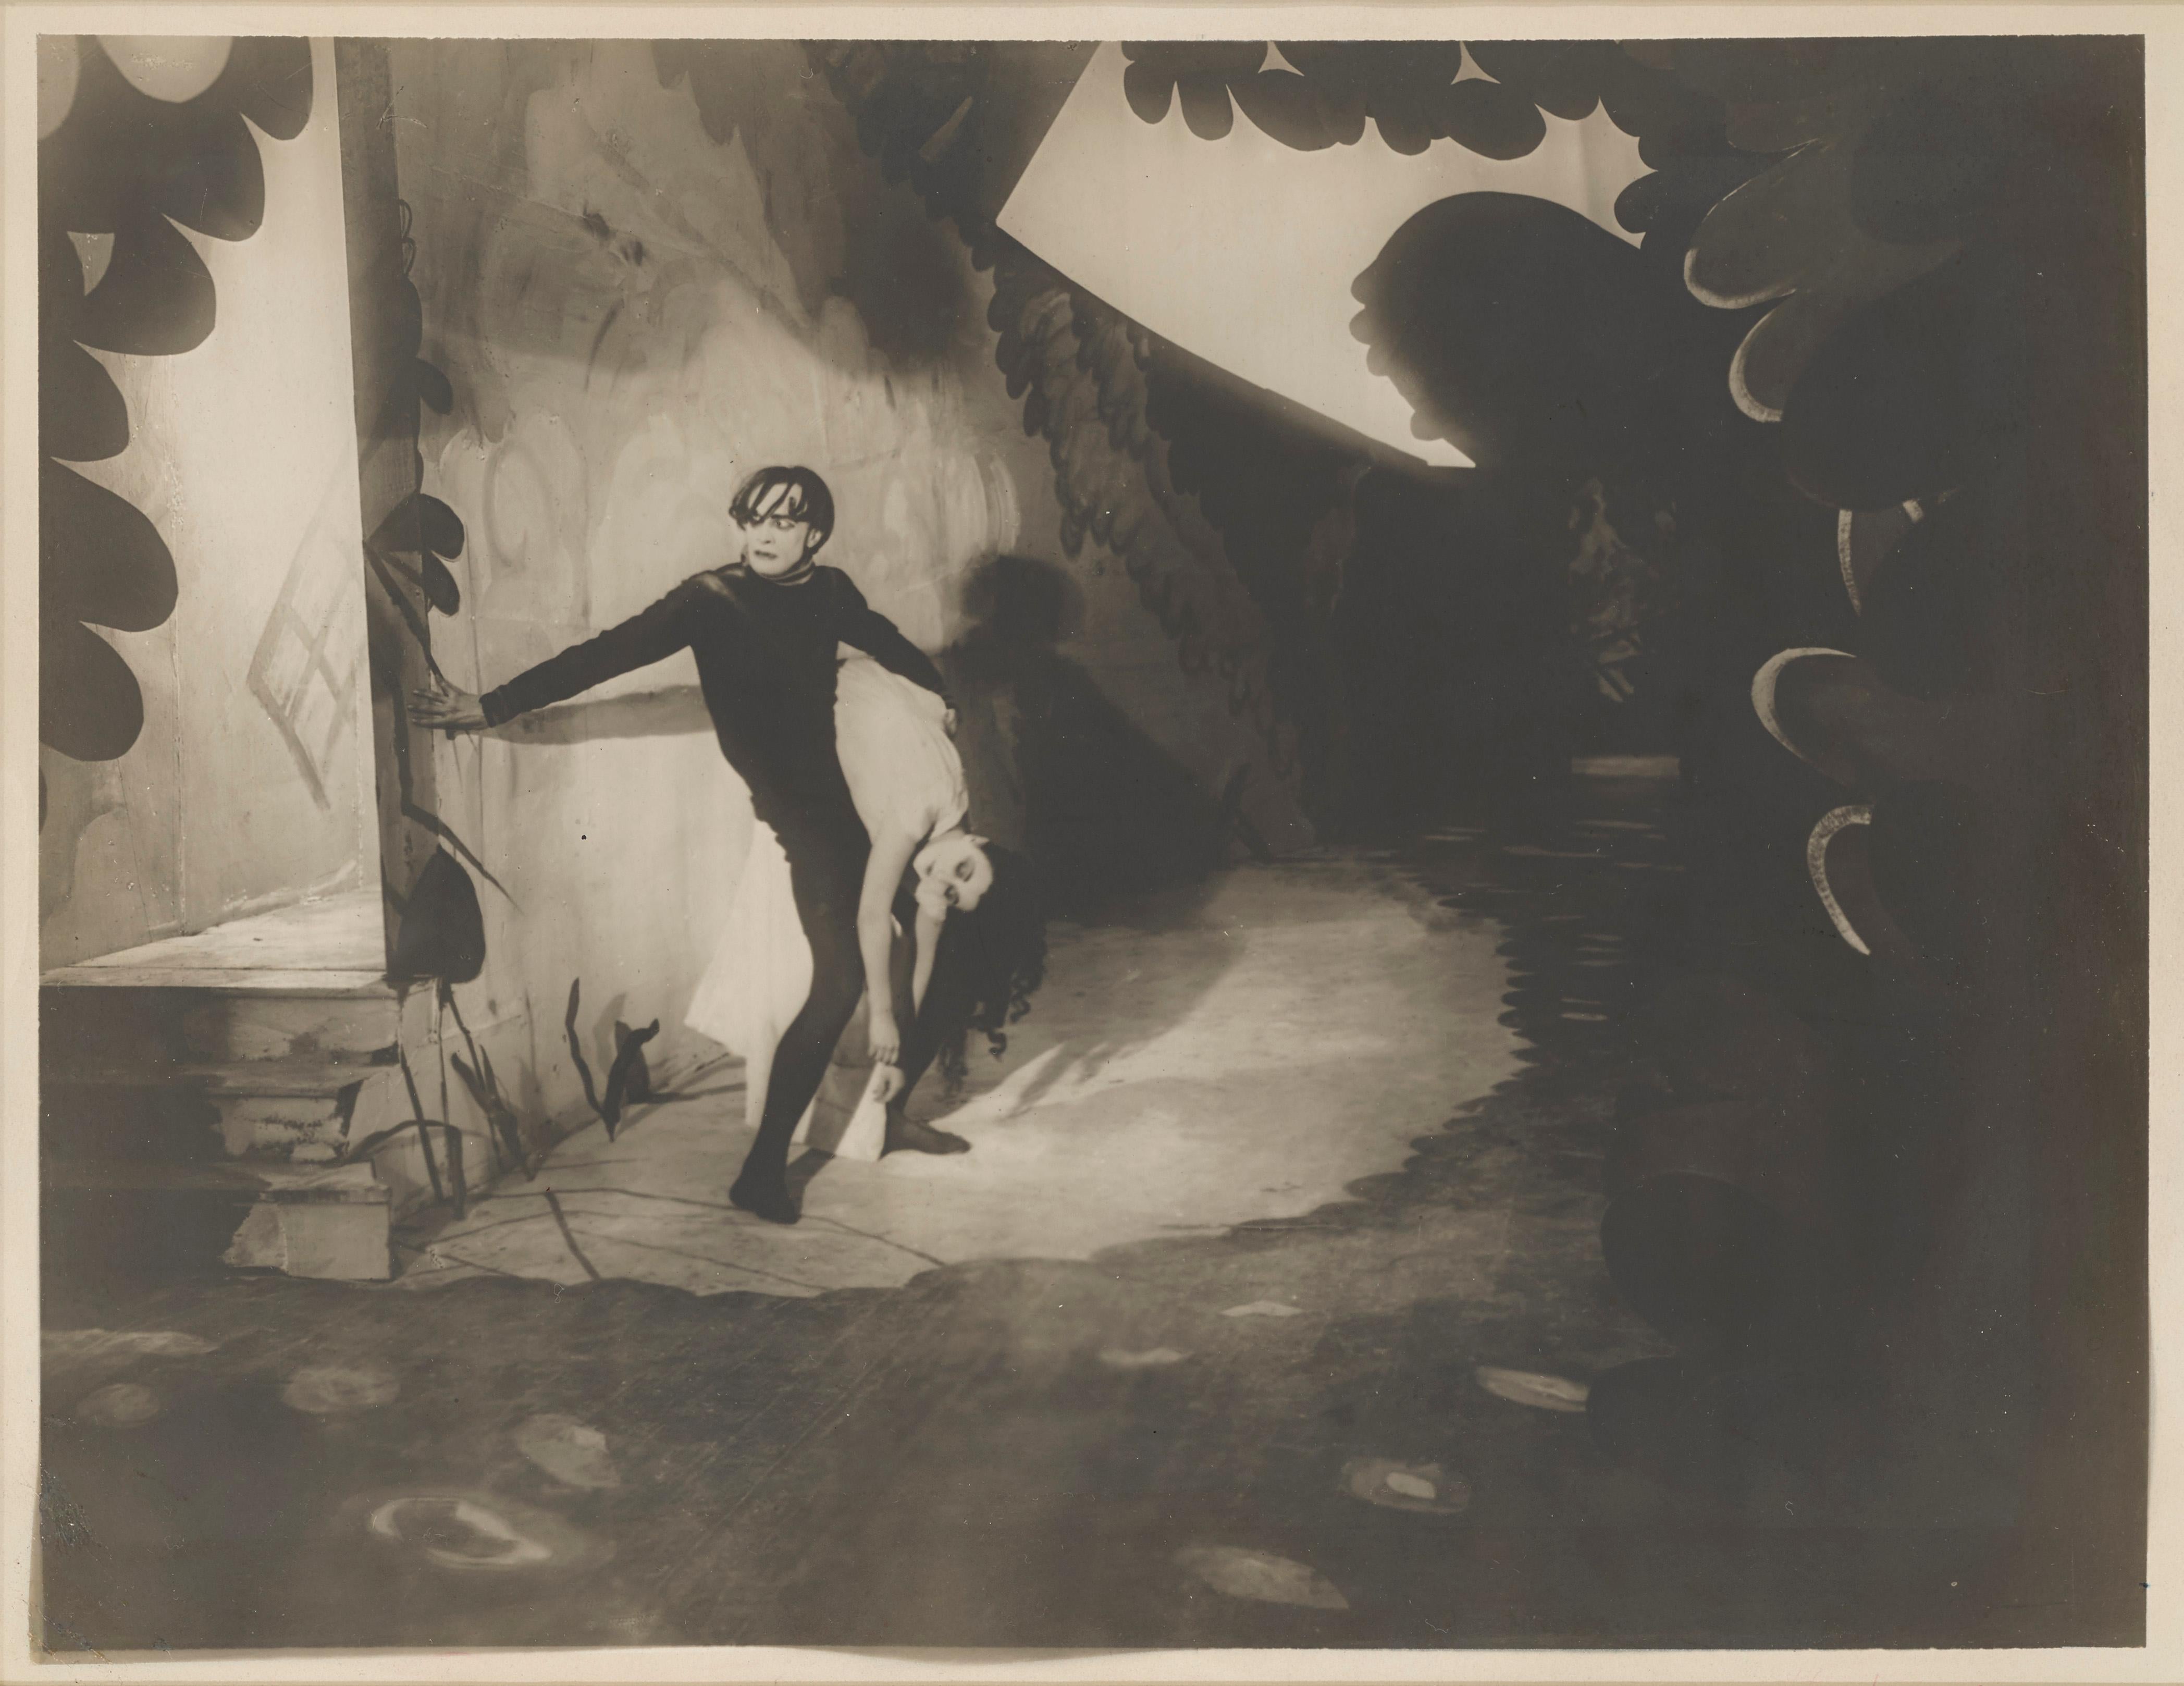 This is a very rare original American oversized studio photograph for the 1920 German expressionist films Das cabinett des Dr. Caligari / The Cabinet of Doctor Caligari.
This landmark film was directed by Robert Wiene and starred Conrad Veidt,